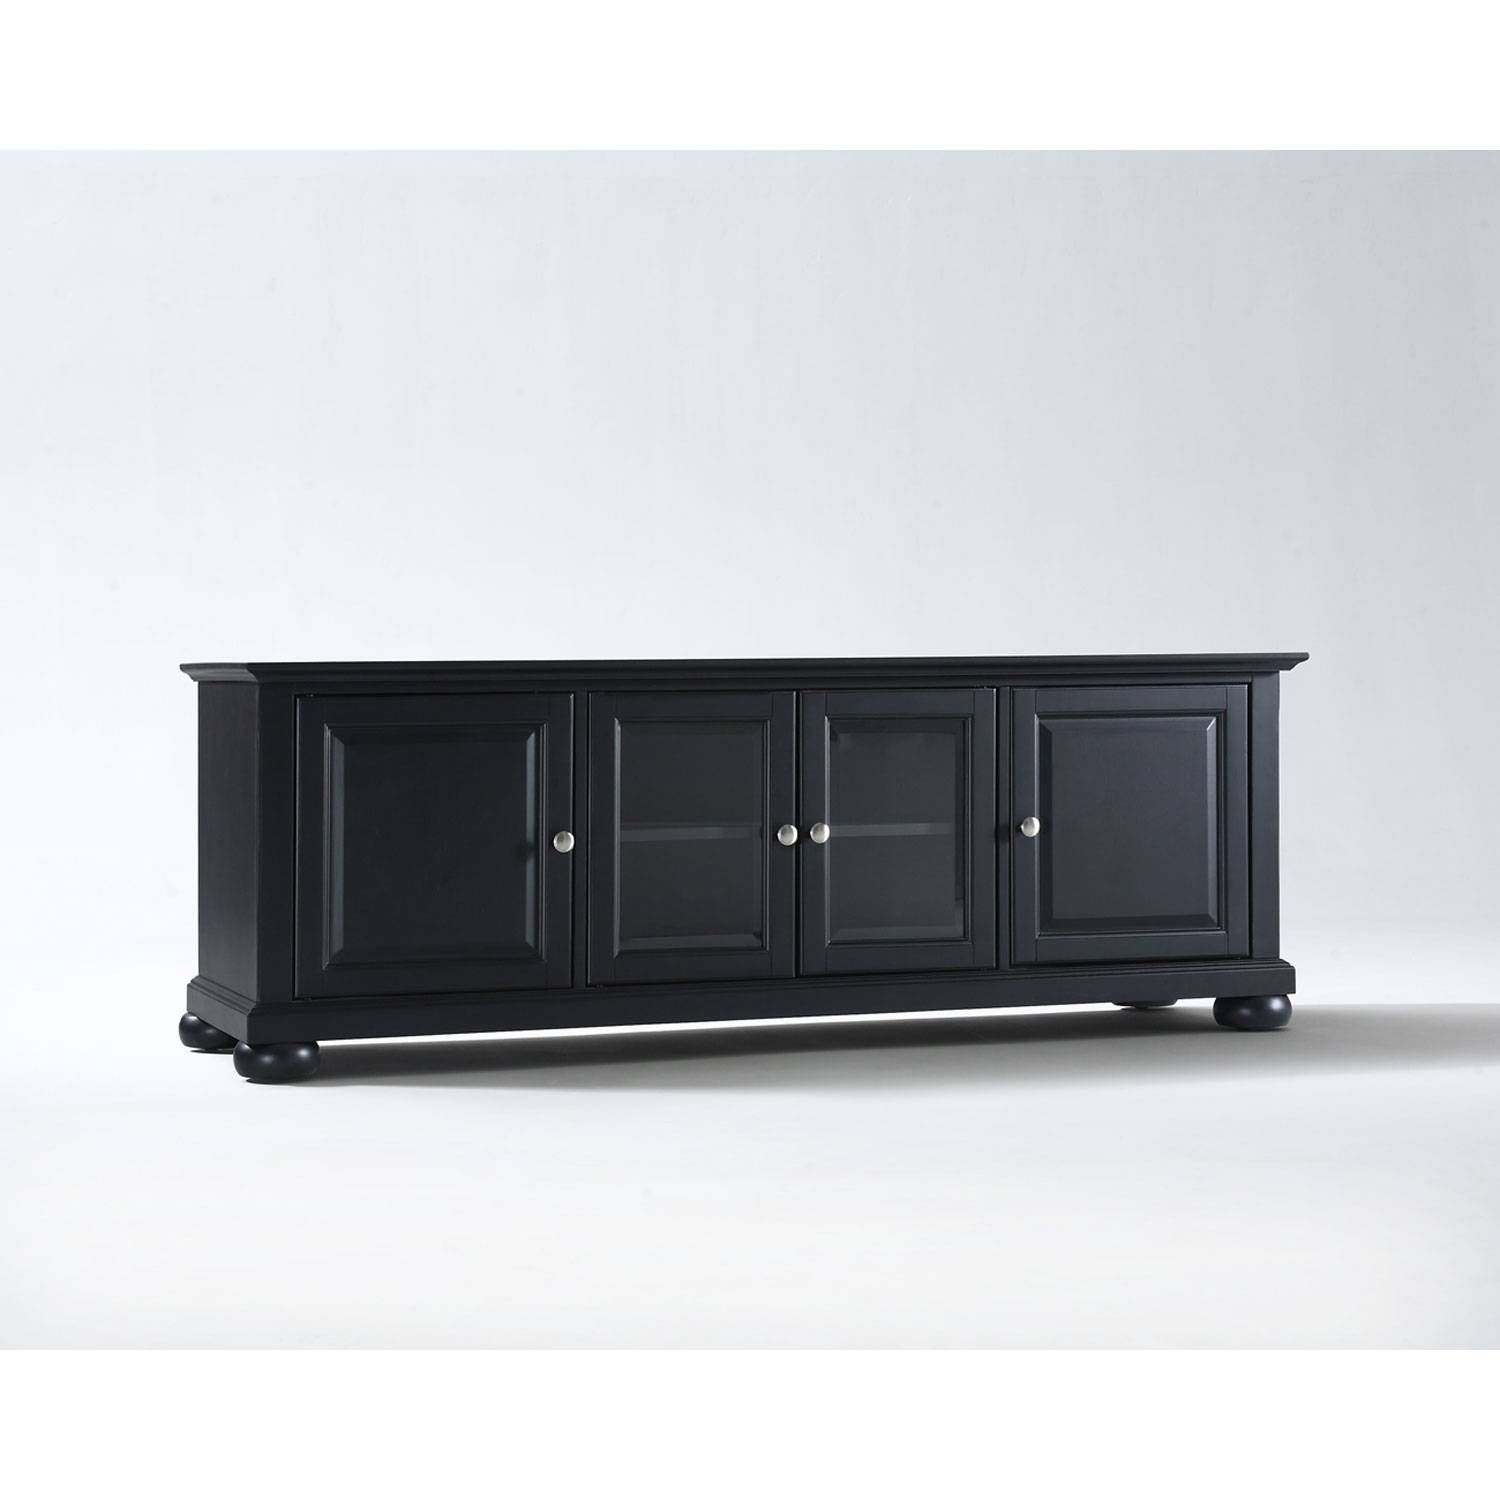 Tv Stands & Cabinets On Sale | Bellacor Inside Low Profile Contemporary Tv Stands (View 8 of 15)